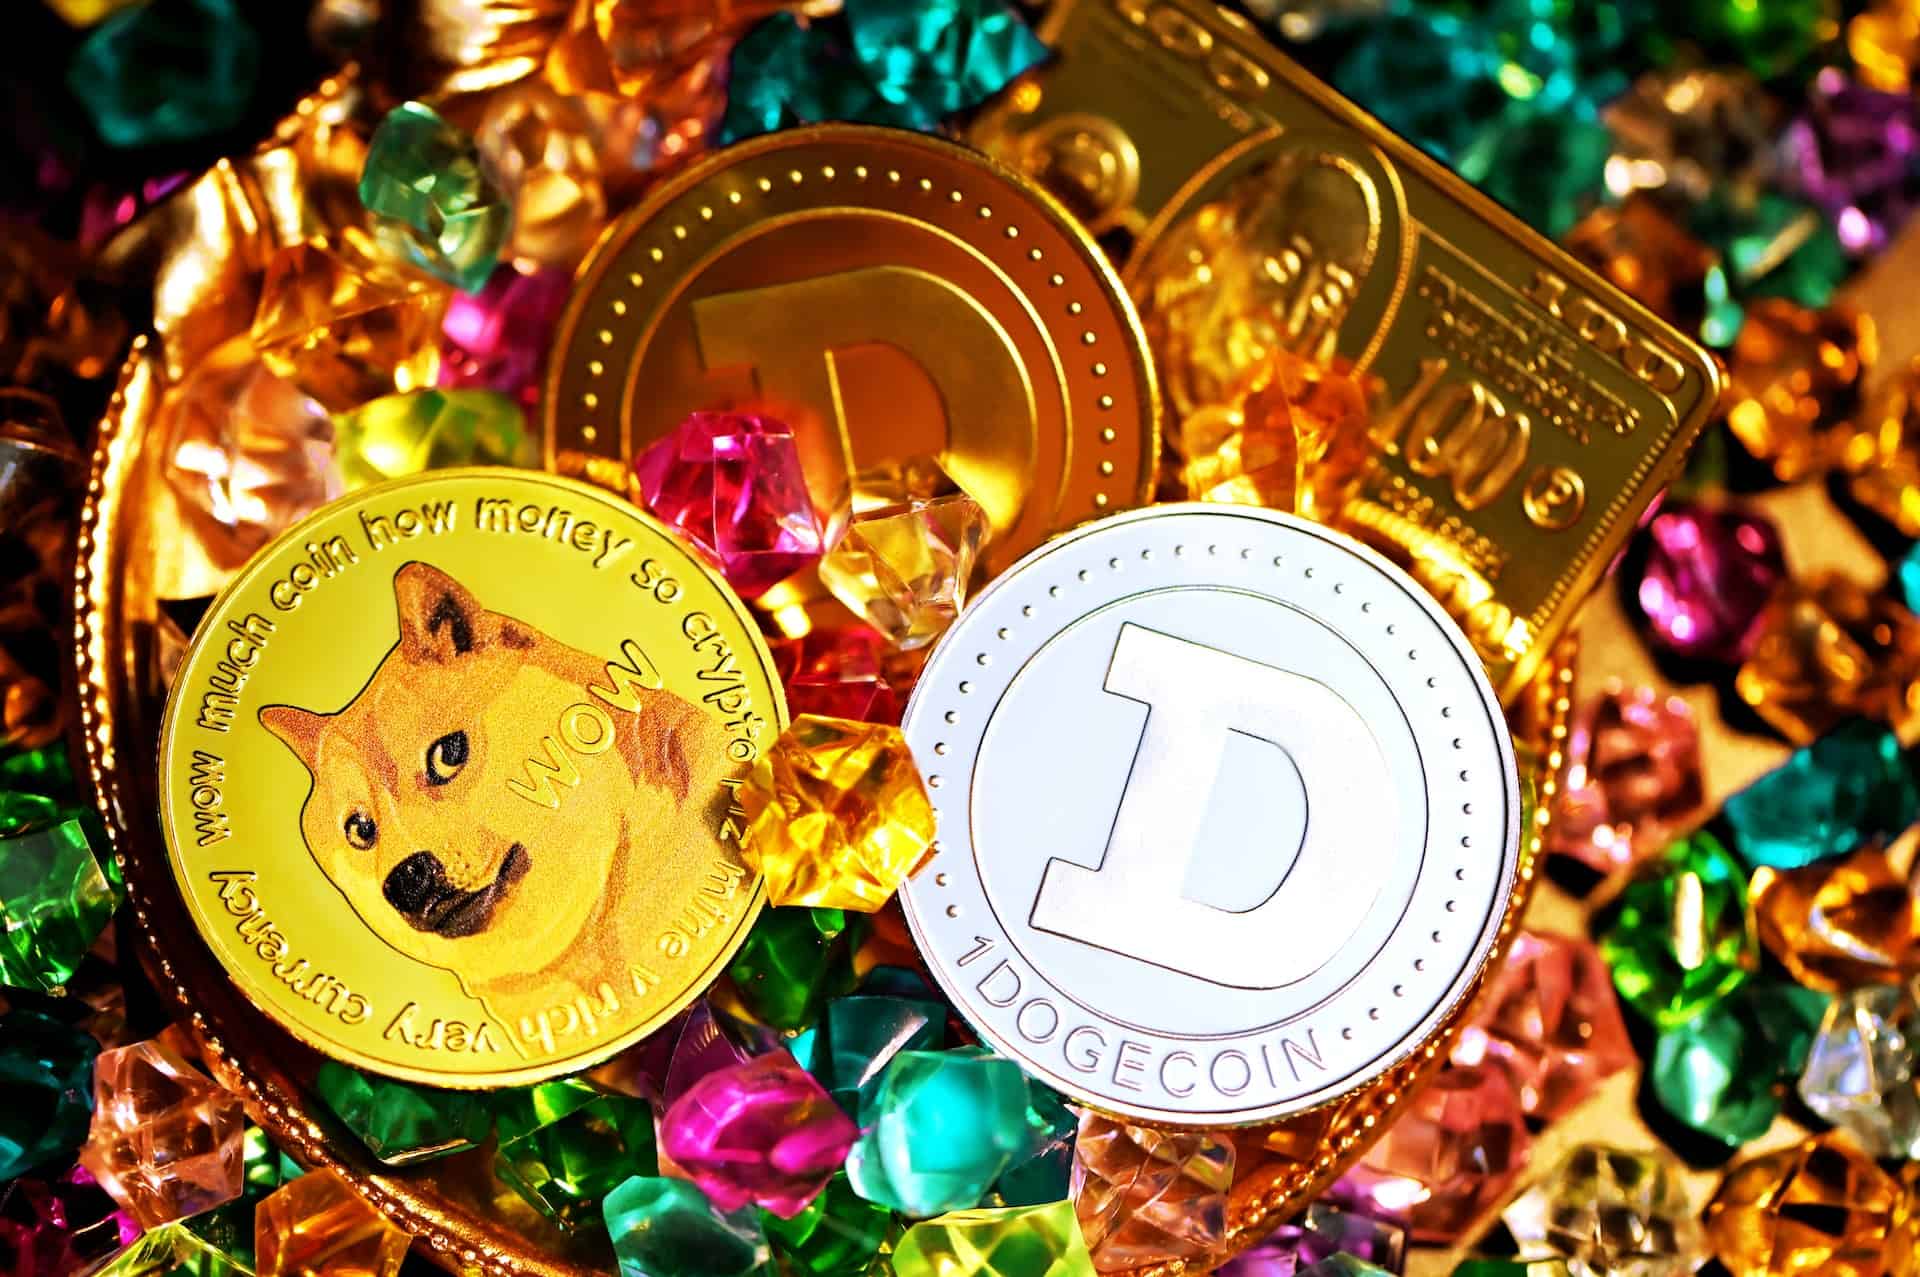 Dogecoin Becomes Whales' Favorite After Musk's Christmas Wishes